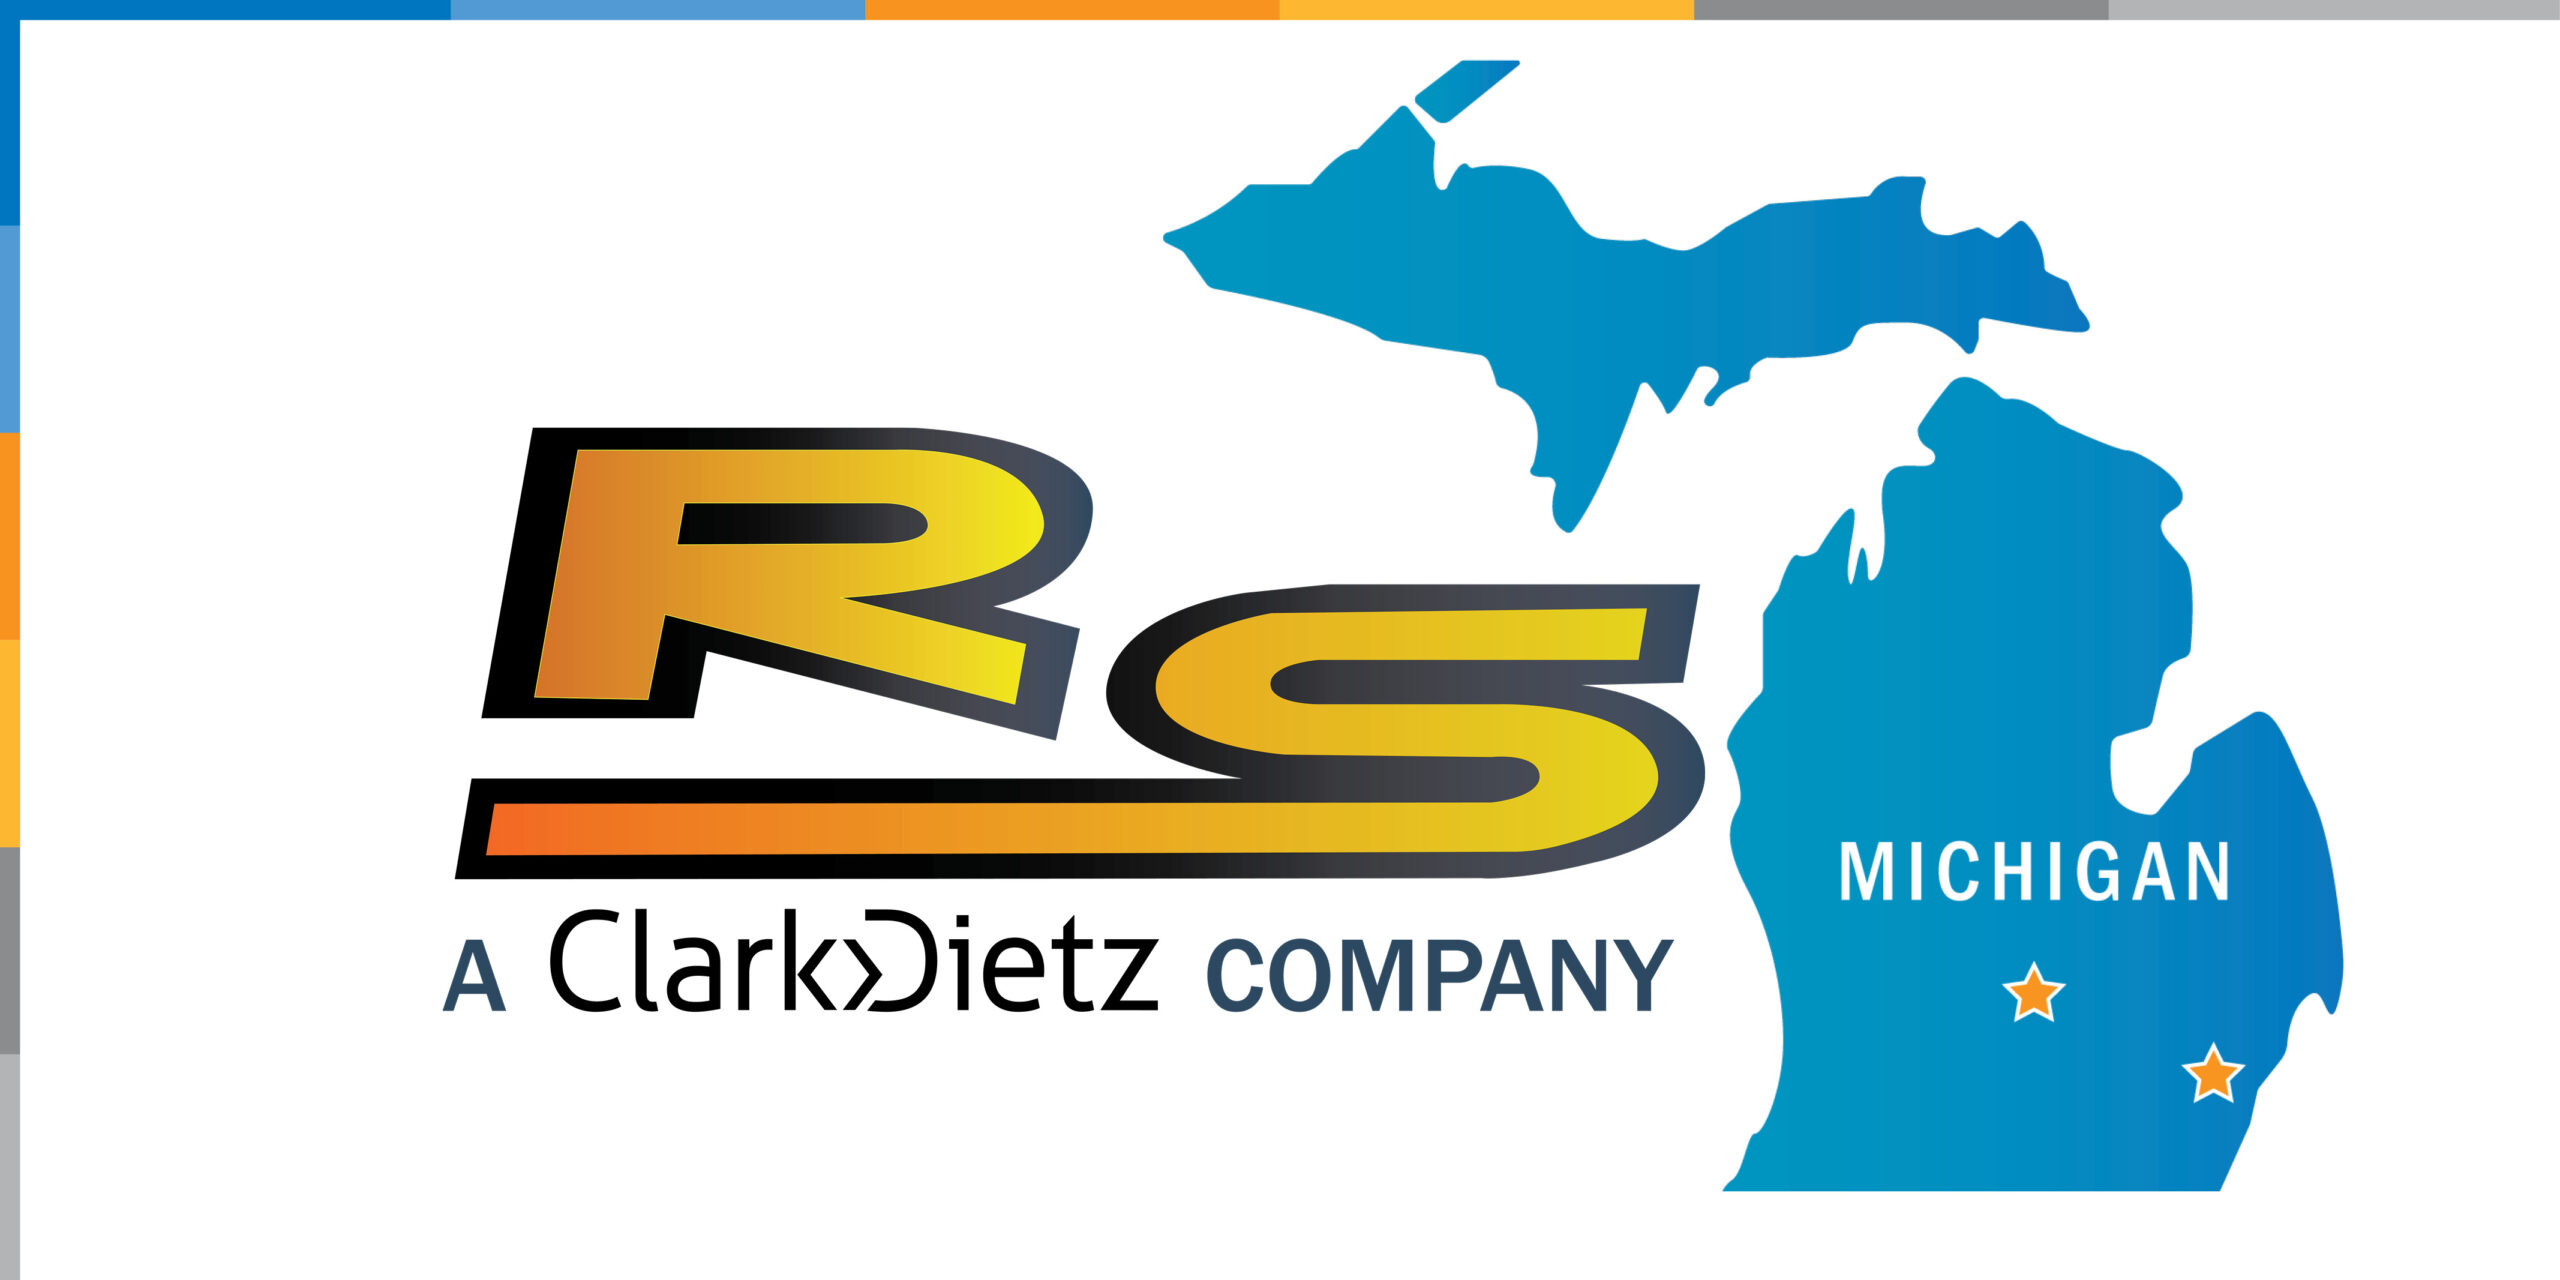 Clark Dietz acquires RS Engineering, a Clark Dietz Company